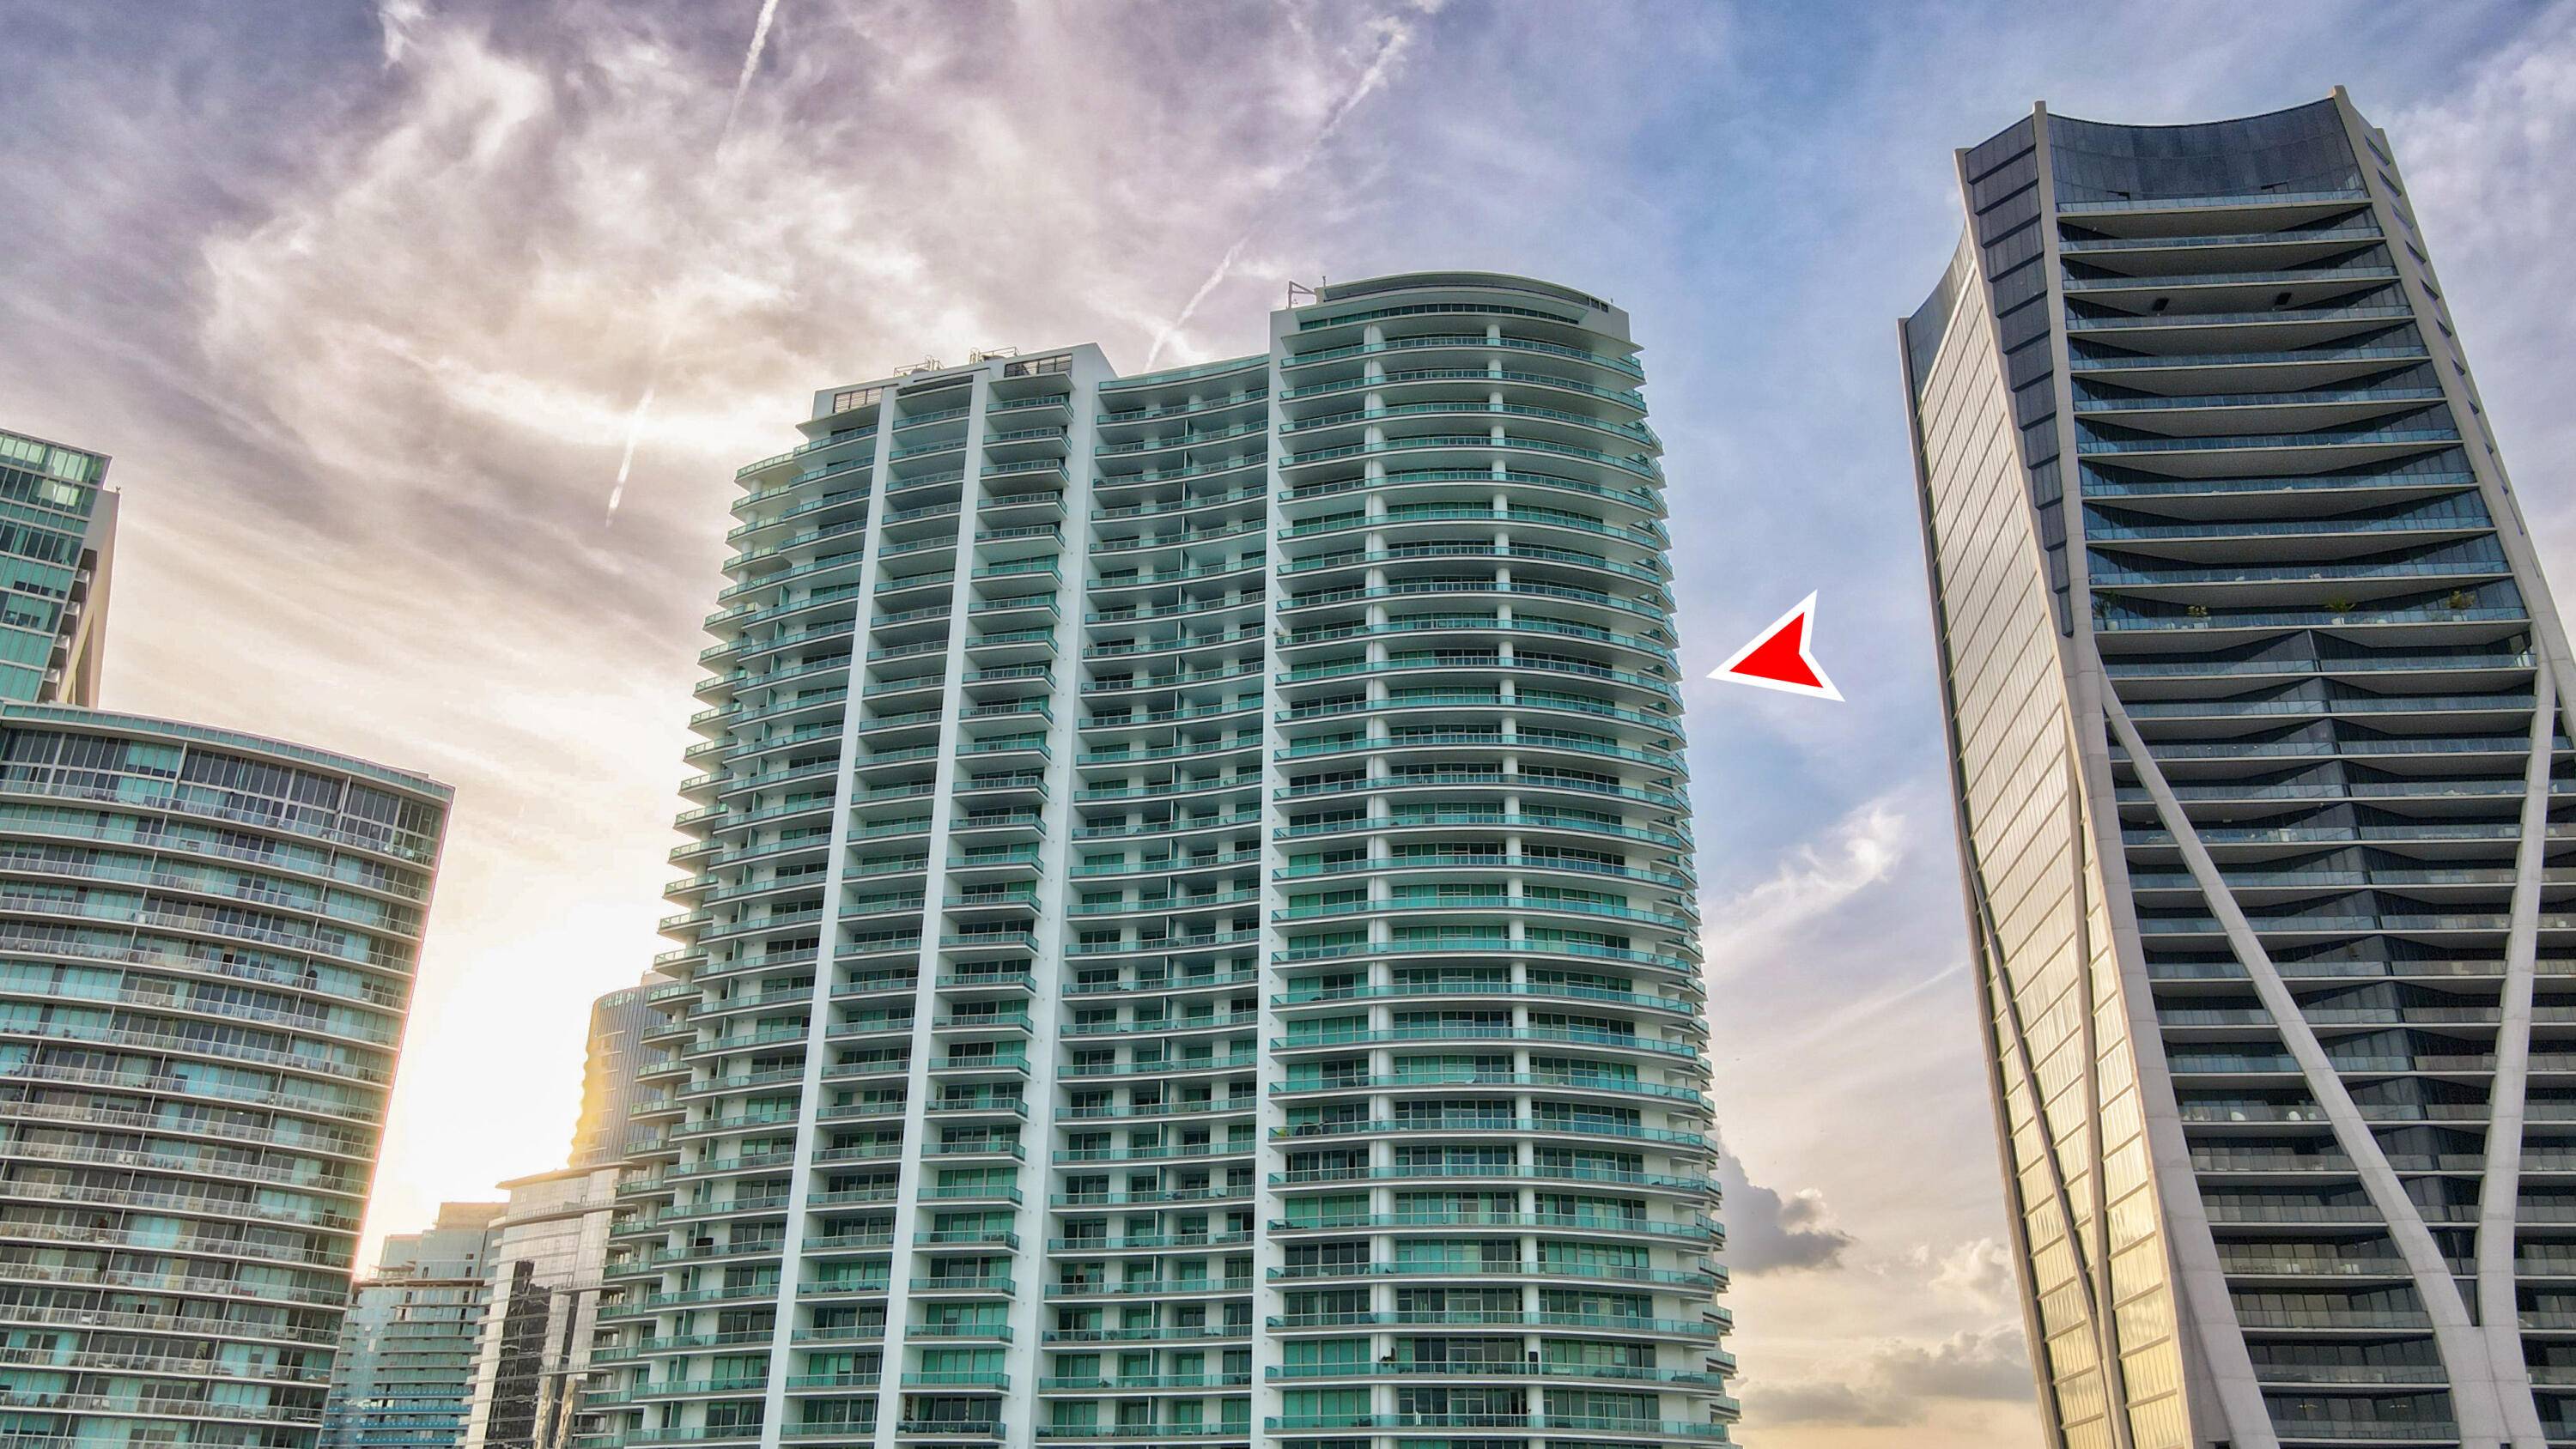 Experience the pinnacle of luxury in our 54th floor Sky Home, perched just shy of the top in a stunning 63 story tower, located in the vibrant heart of Miami.